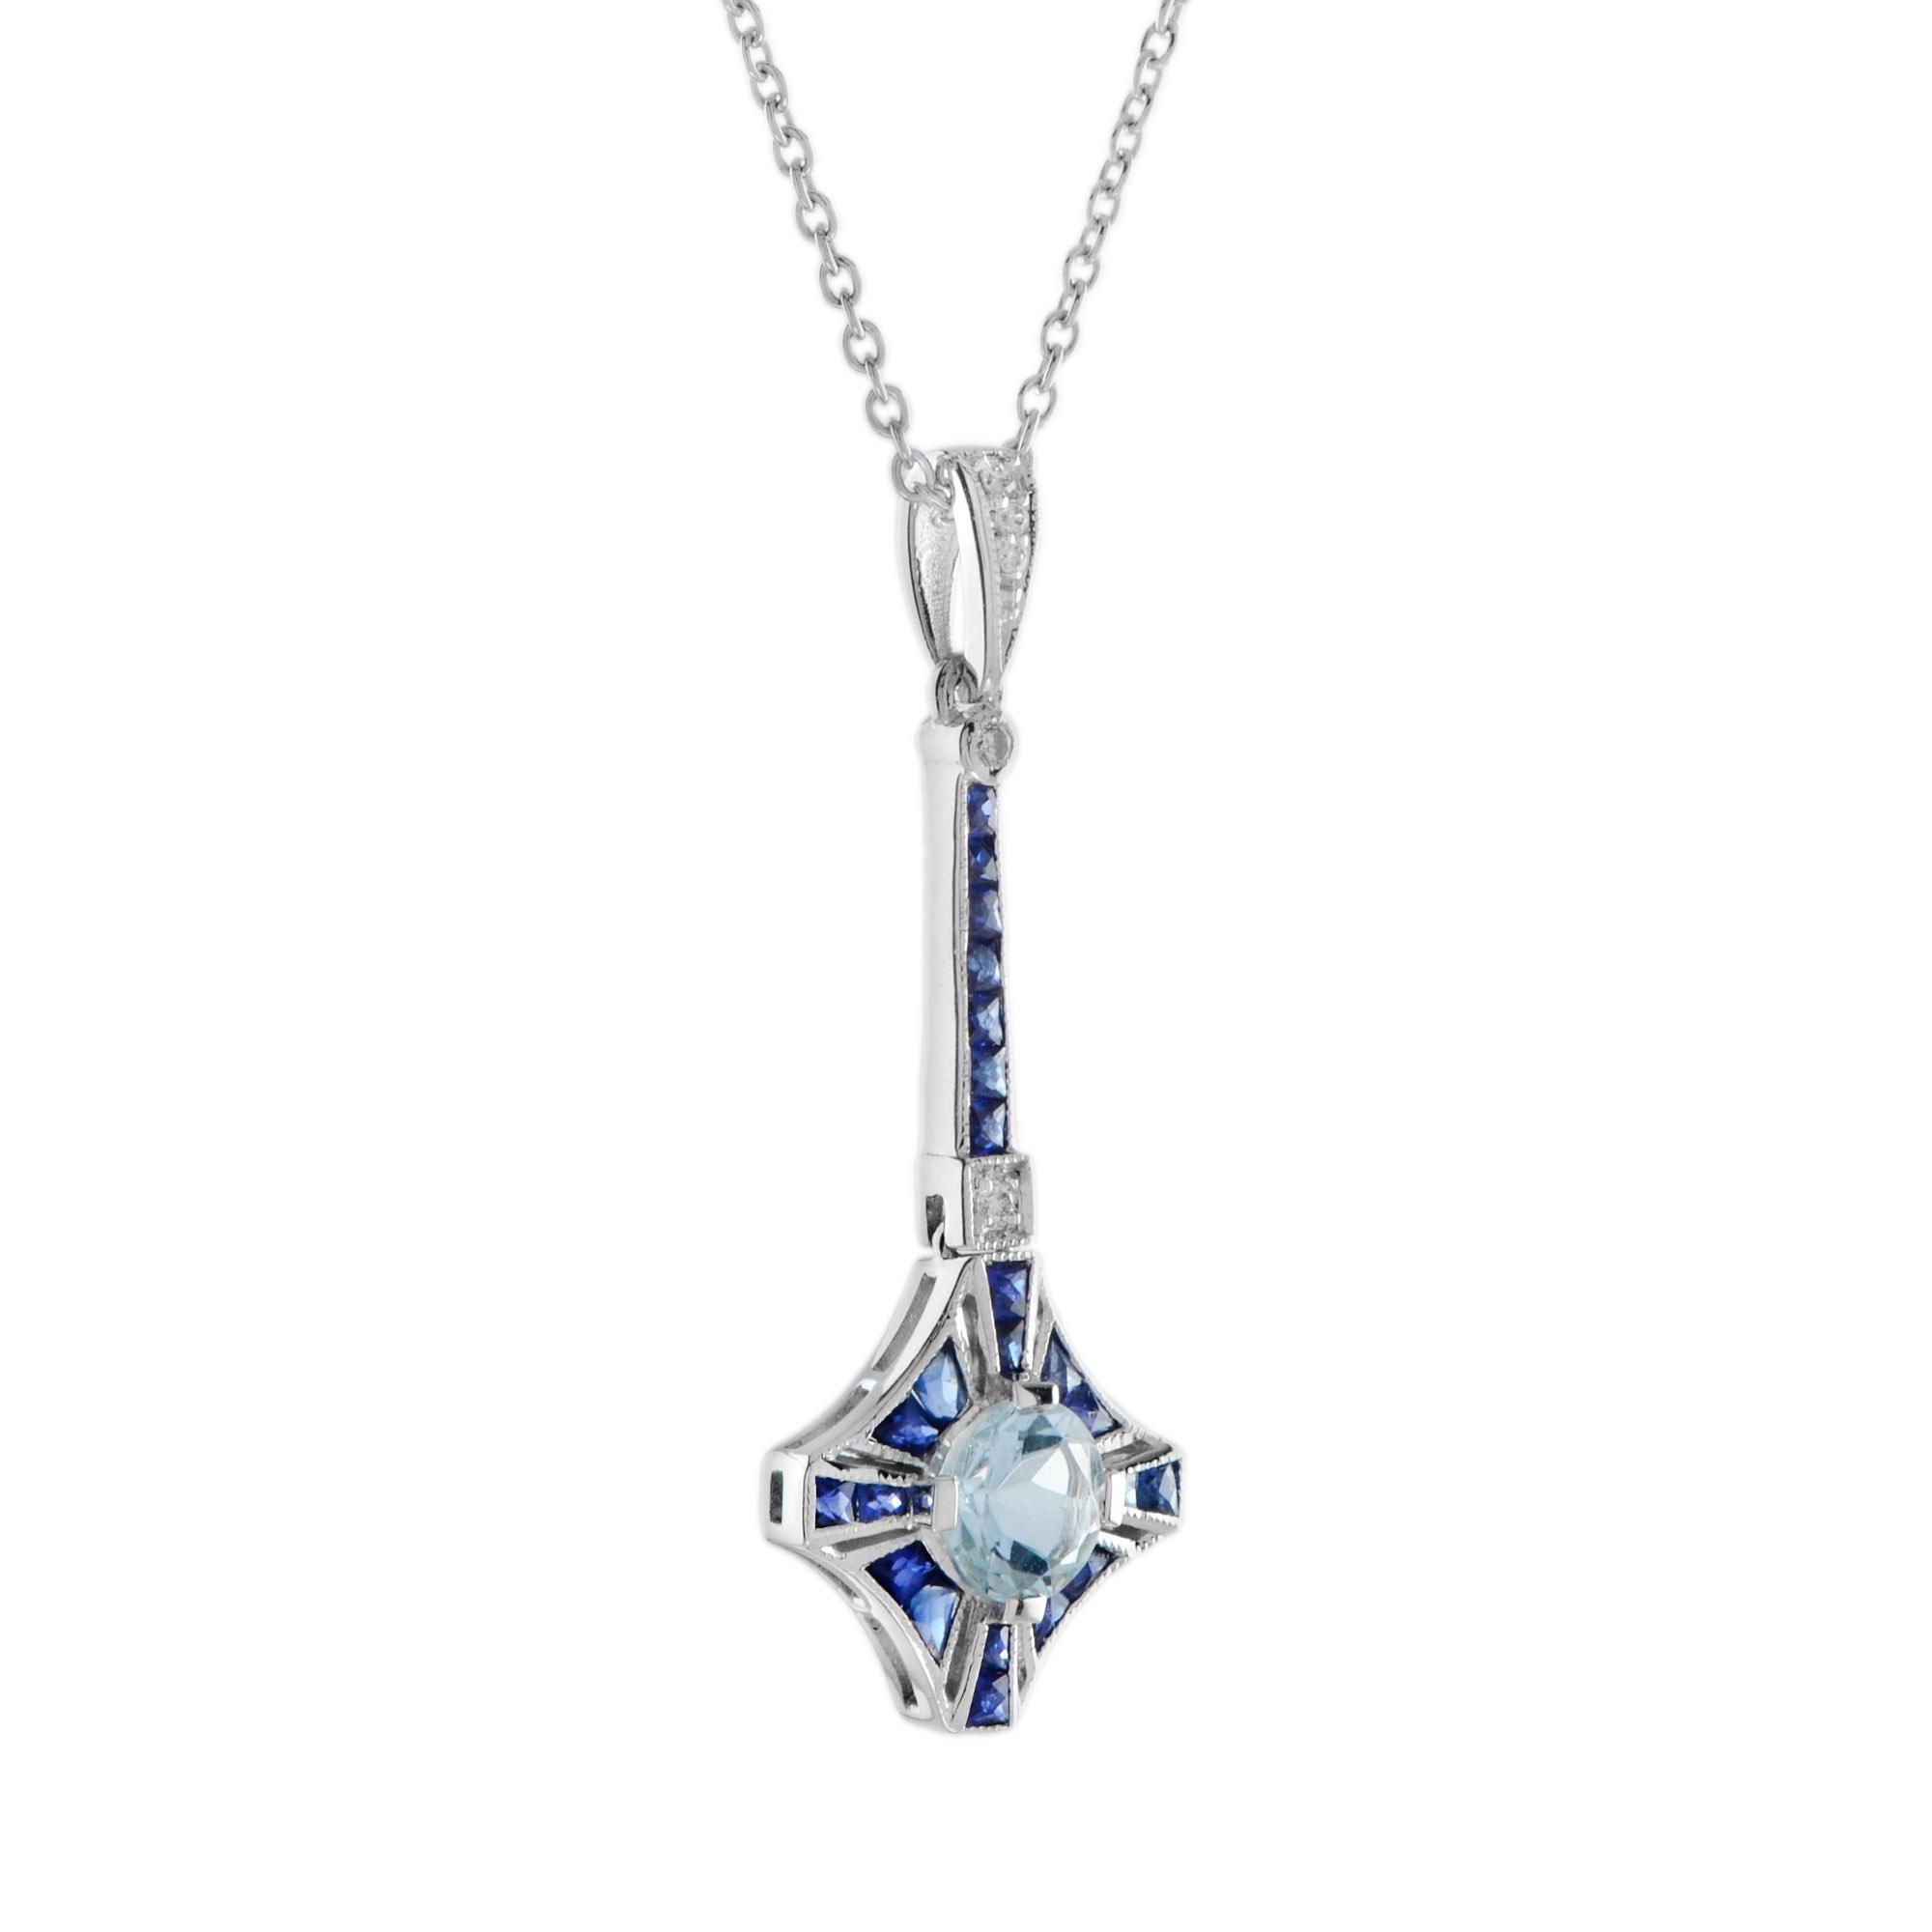 A classic beauty of yesteryear. This Art Deco inspired pendant features a round aquamarine, surrounded by French cut blue sapphires and diamonds on the its top part. The pendant is set in 18k white gold with exquisite milgrain detail.

Necklace